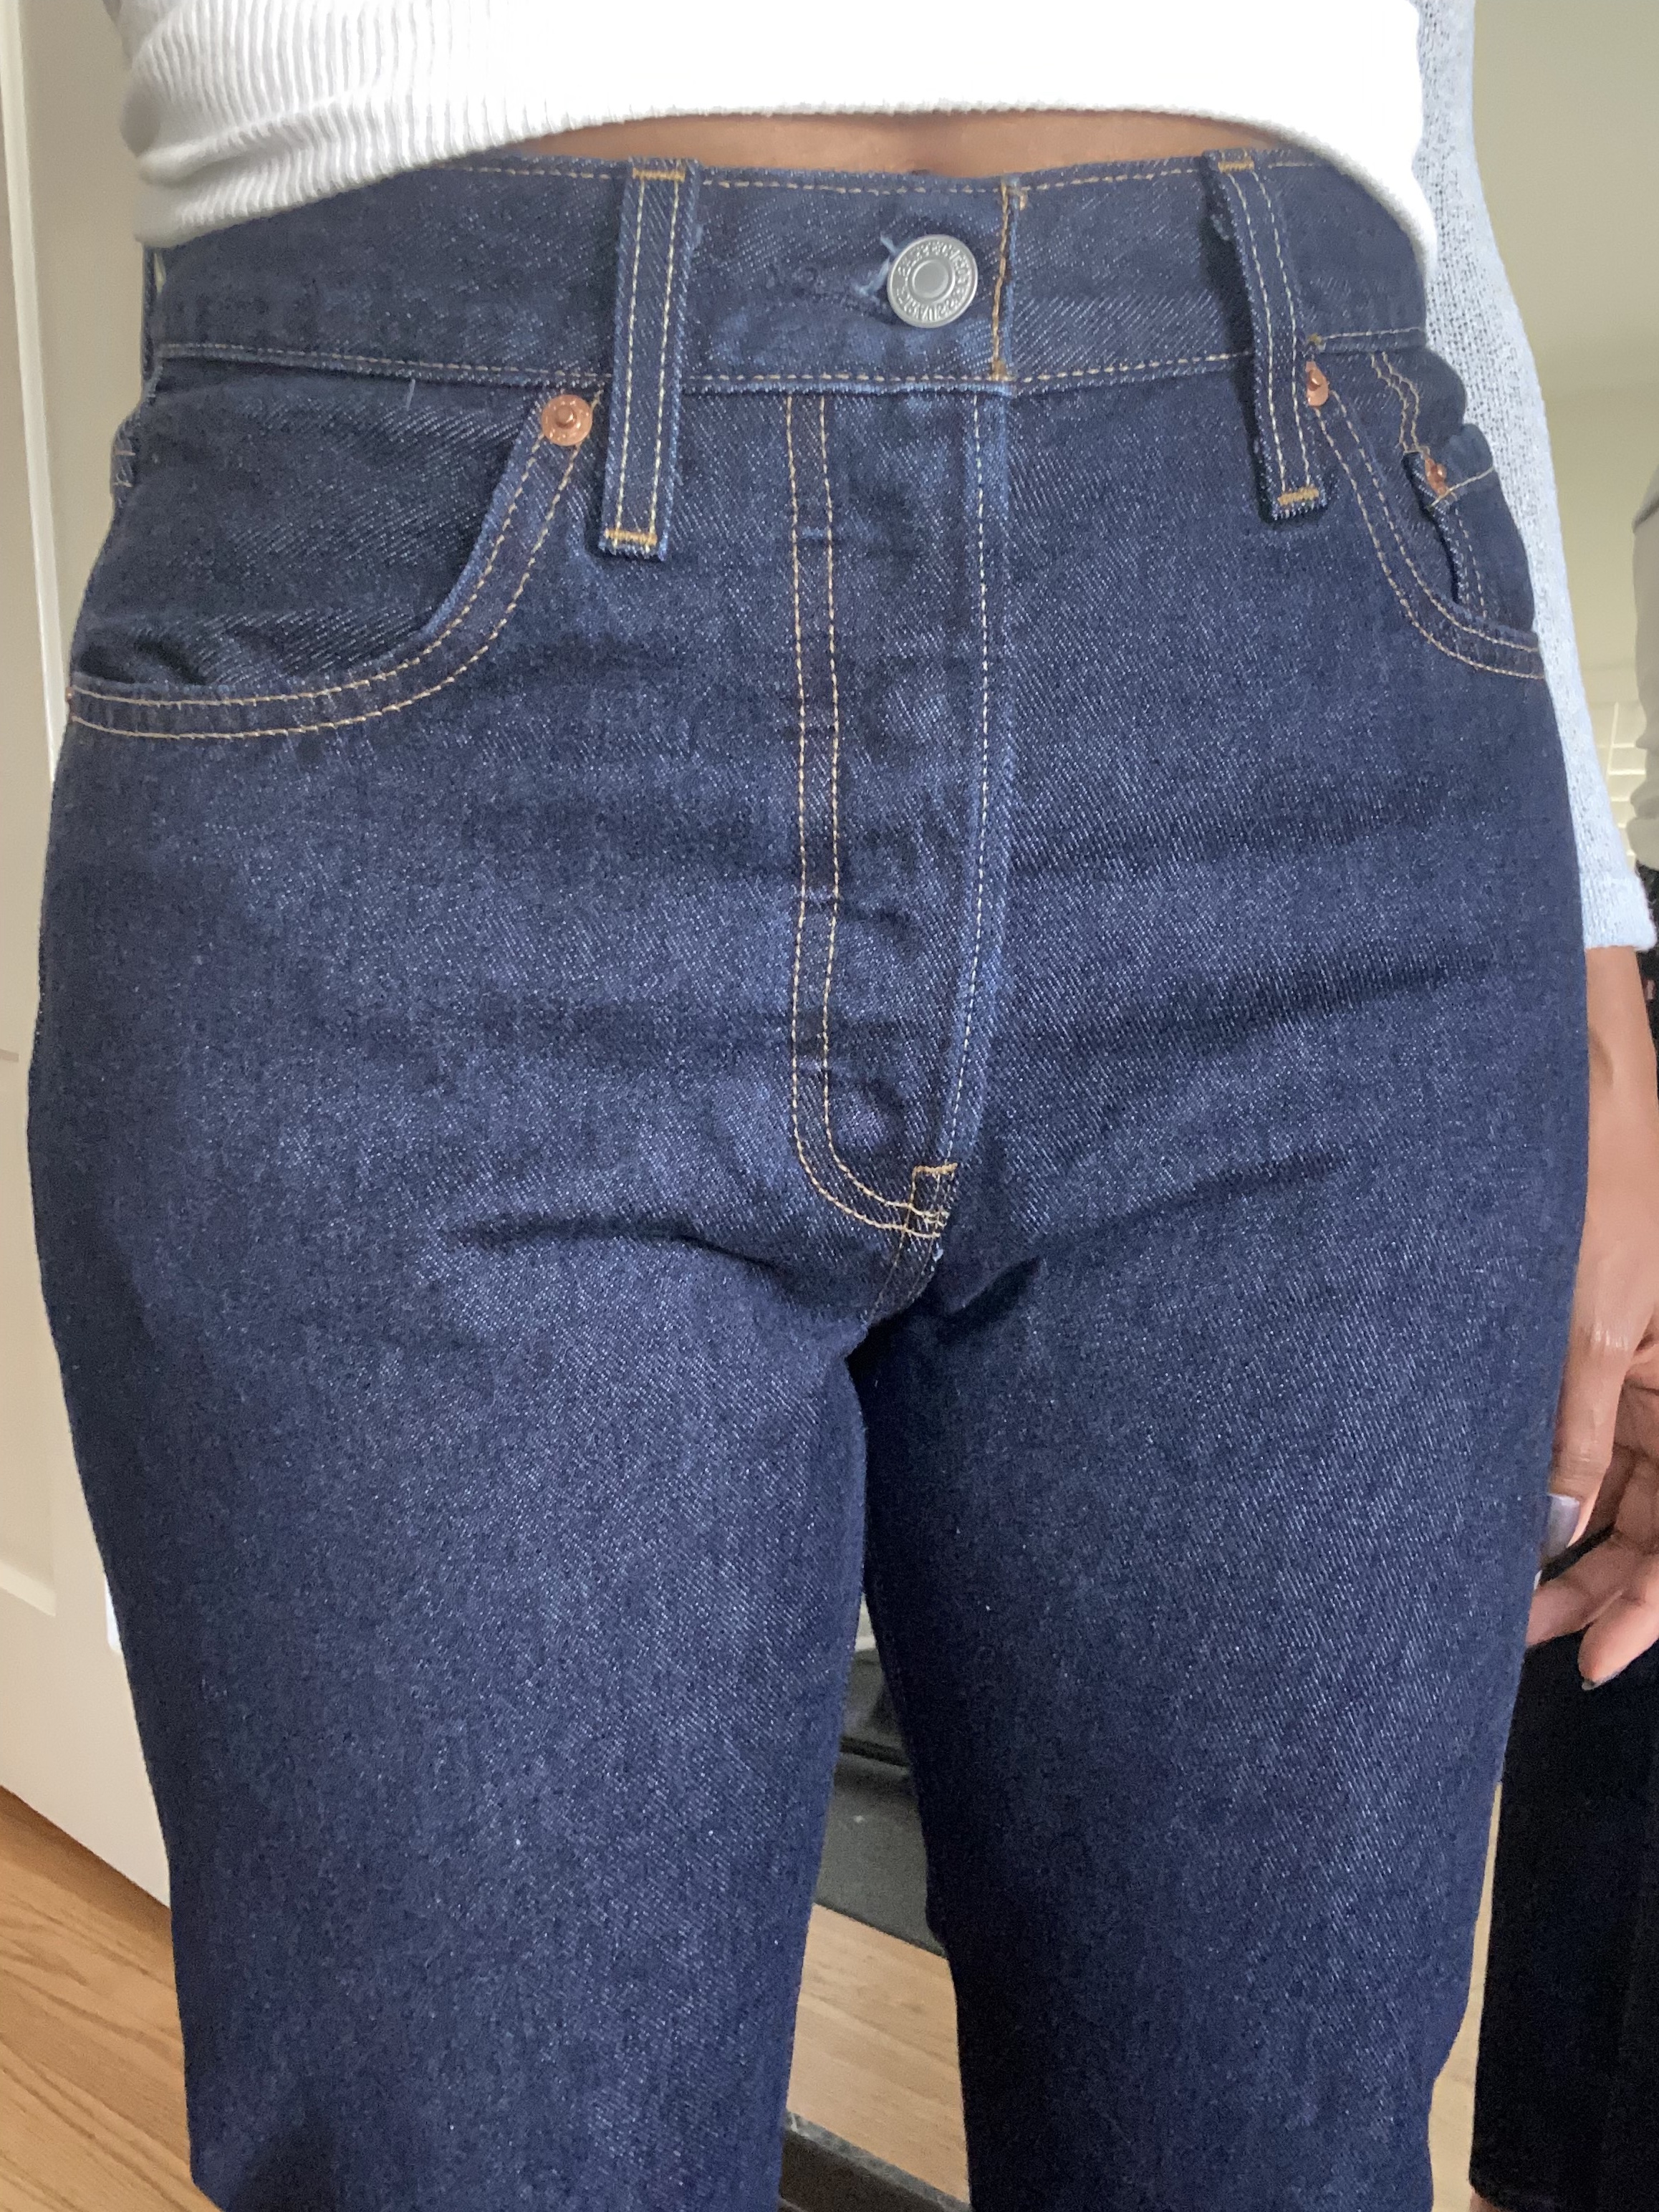 8 Best Levi's Jeans for Women, Editor-Tested and Reviewed | Who What Wear